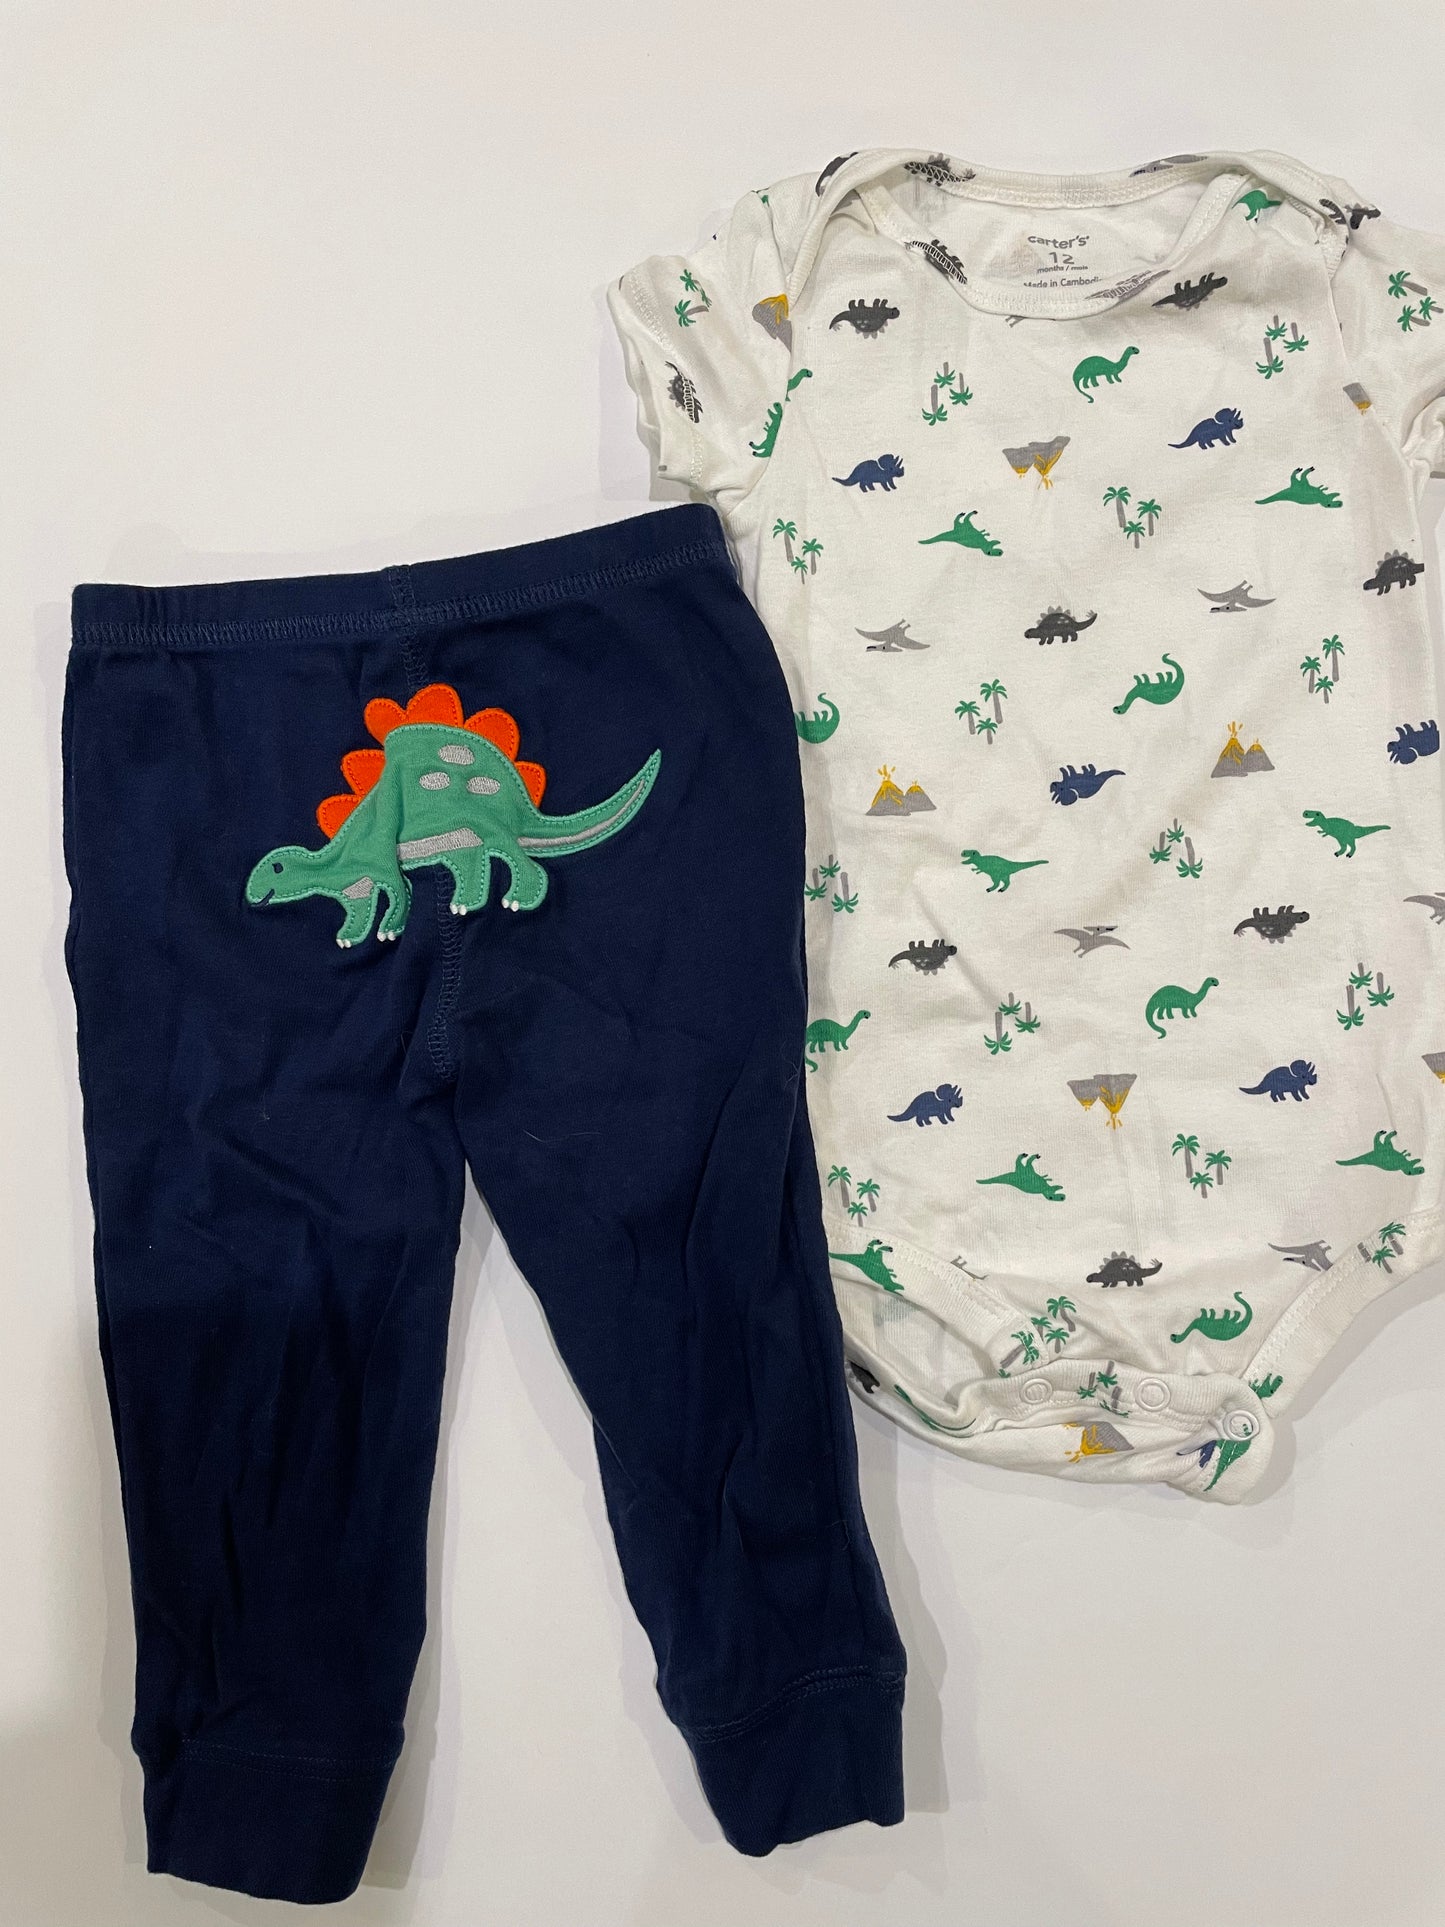 Carters 12 mo boys outfit, dino